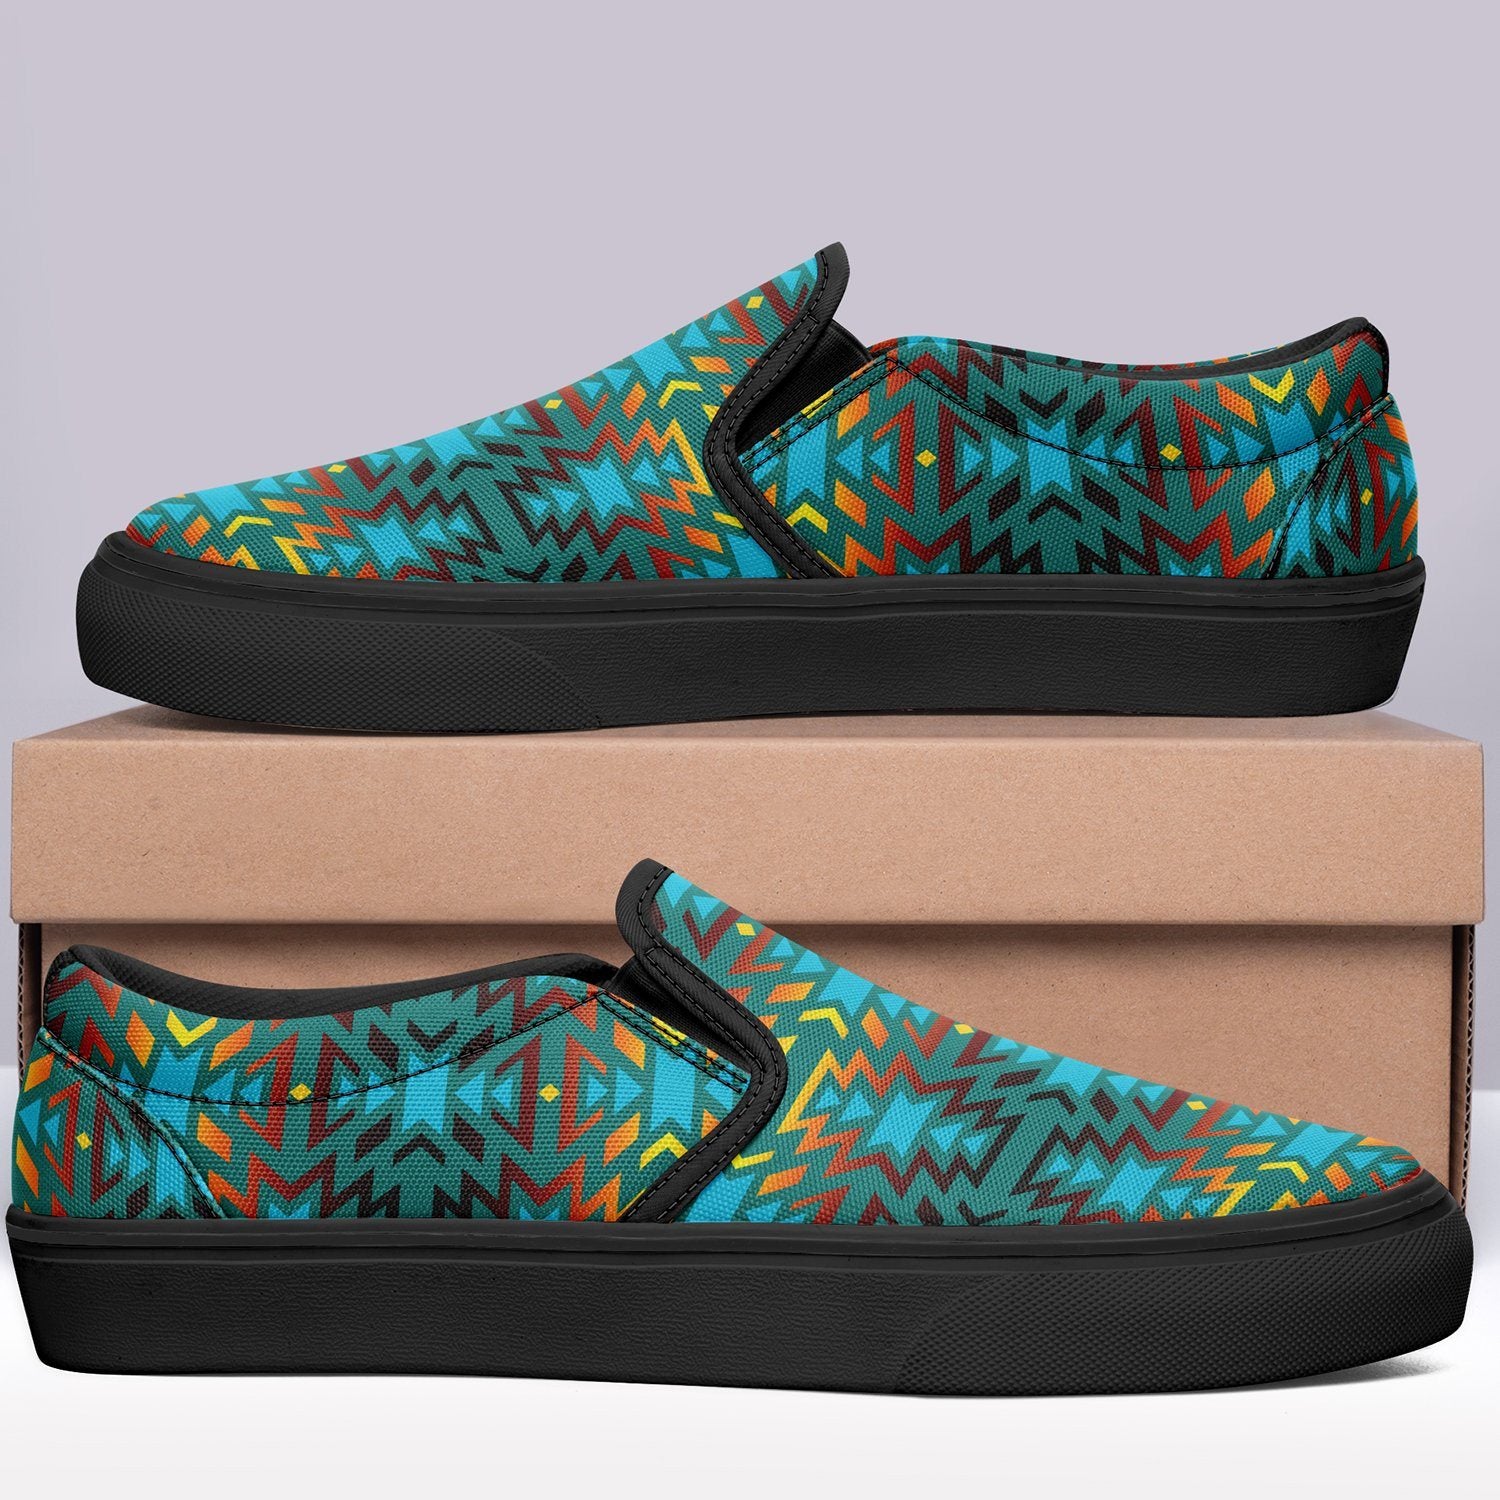 Fire Colors and Turquoise Teal Otoyimm Canvas Slip On Shoes 49 Dzine 